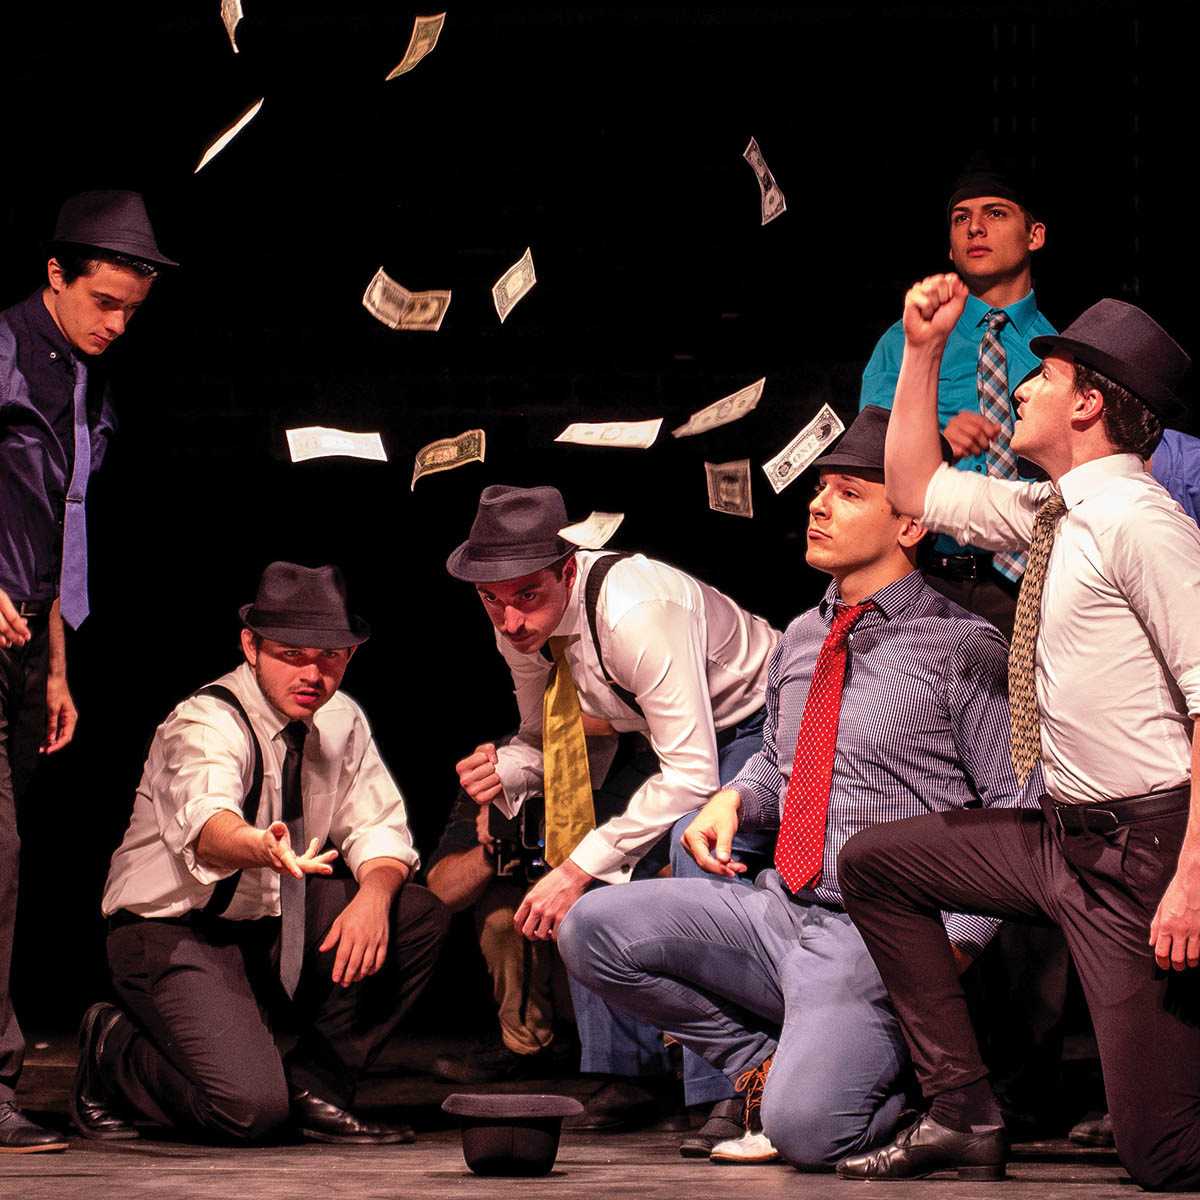 A Peoples Bank Theatre performance of Guys and Dolls